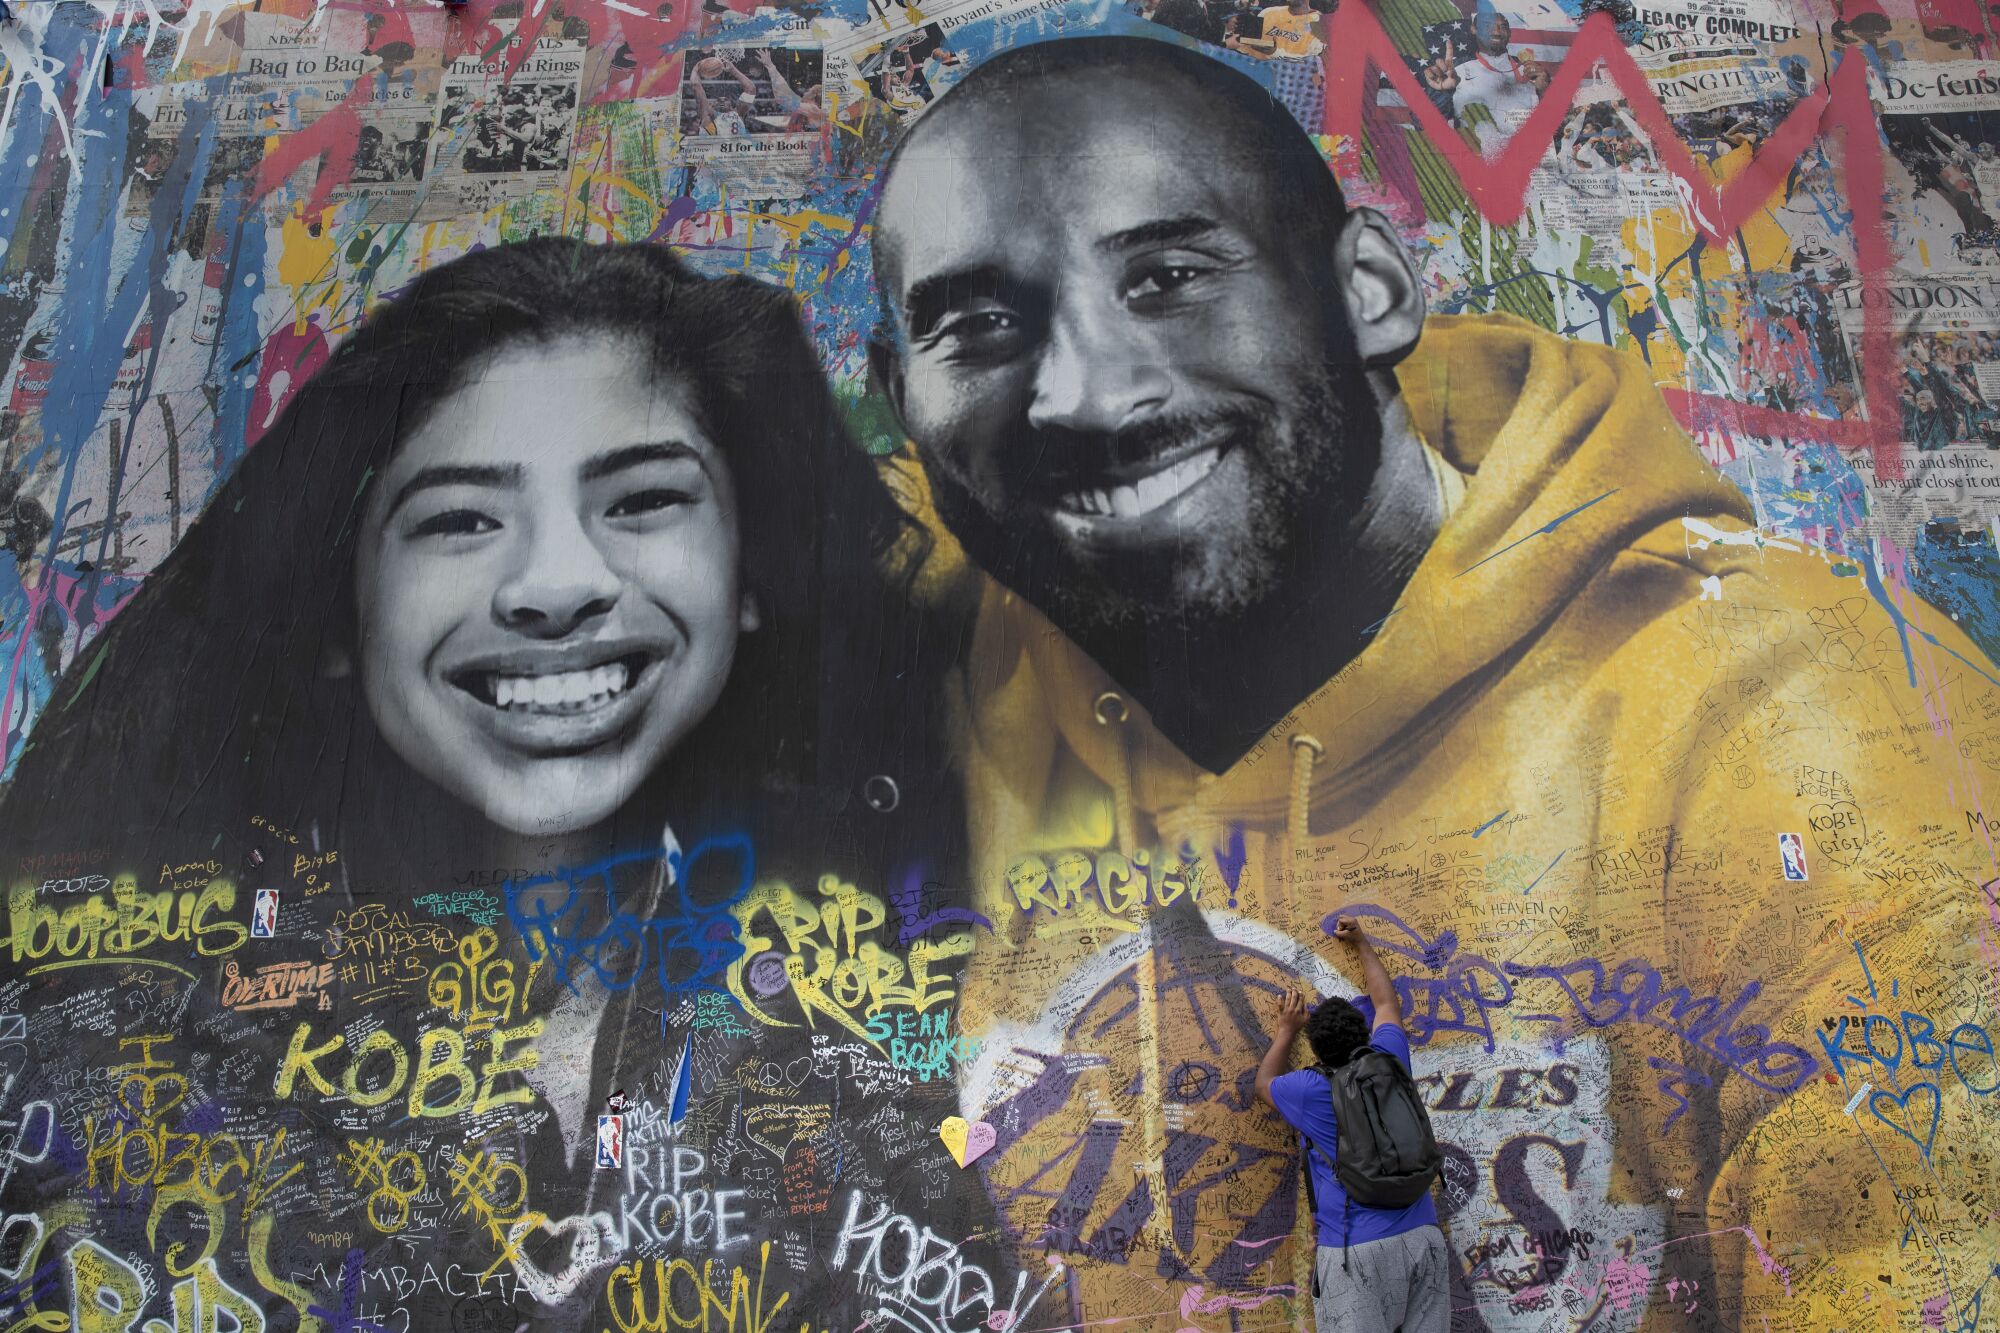 Ernest Wilson writes a message on a mural that features an image of a smiling Kobe Bryant and daughter Gianna.